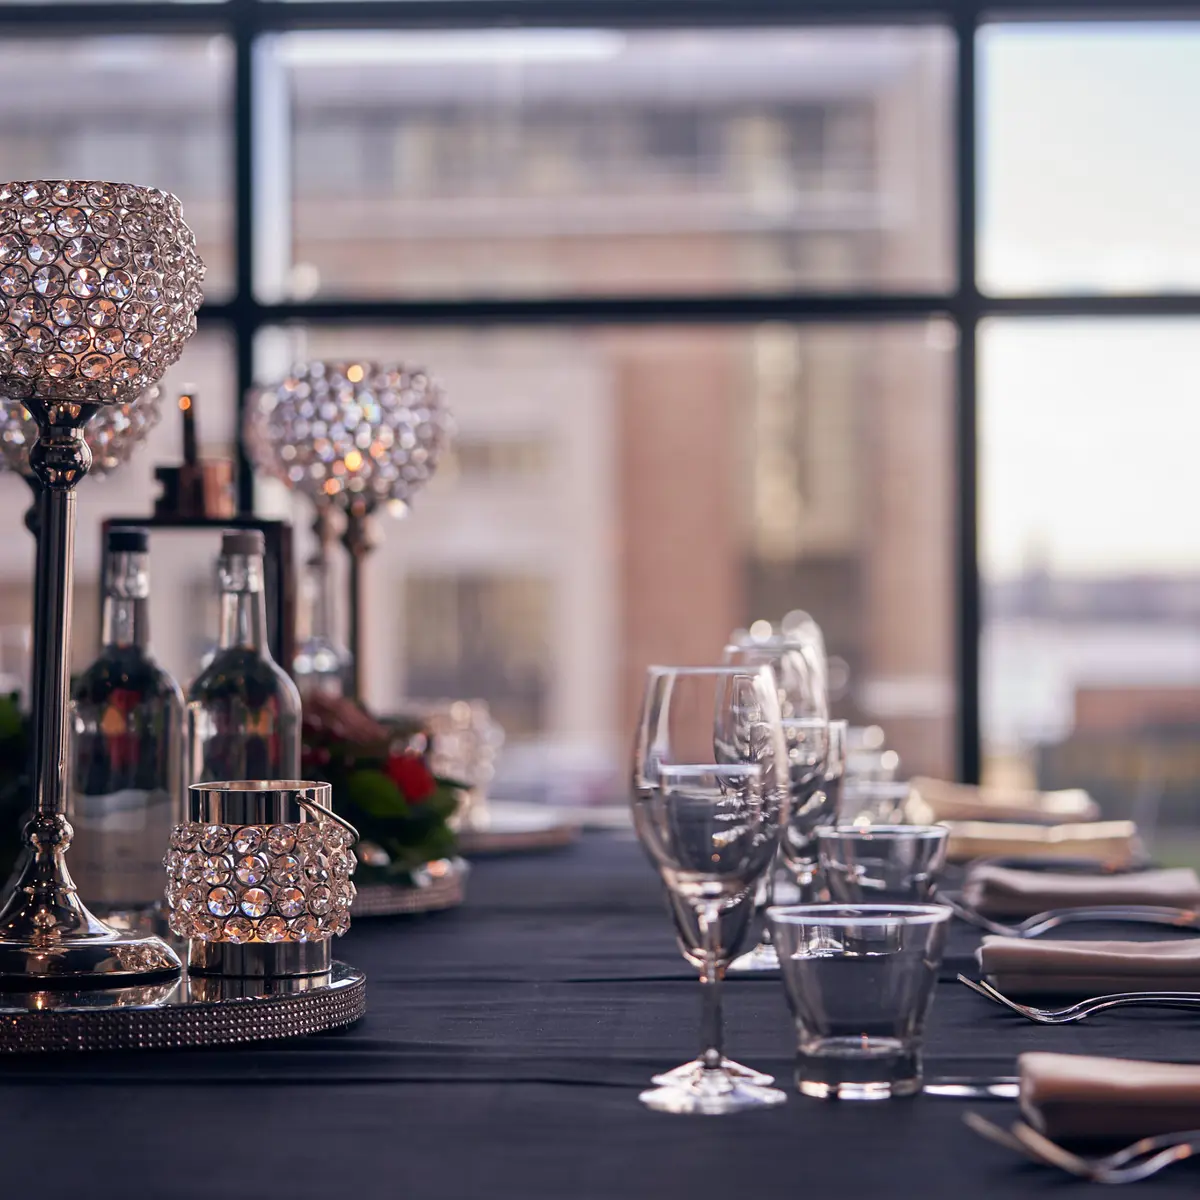 A beautifully arranged table adorned with elegant wine glasses and gleaming silverware.